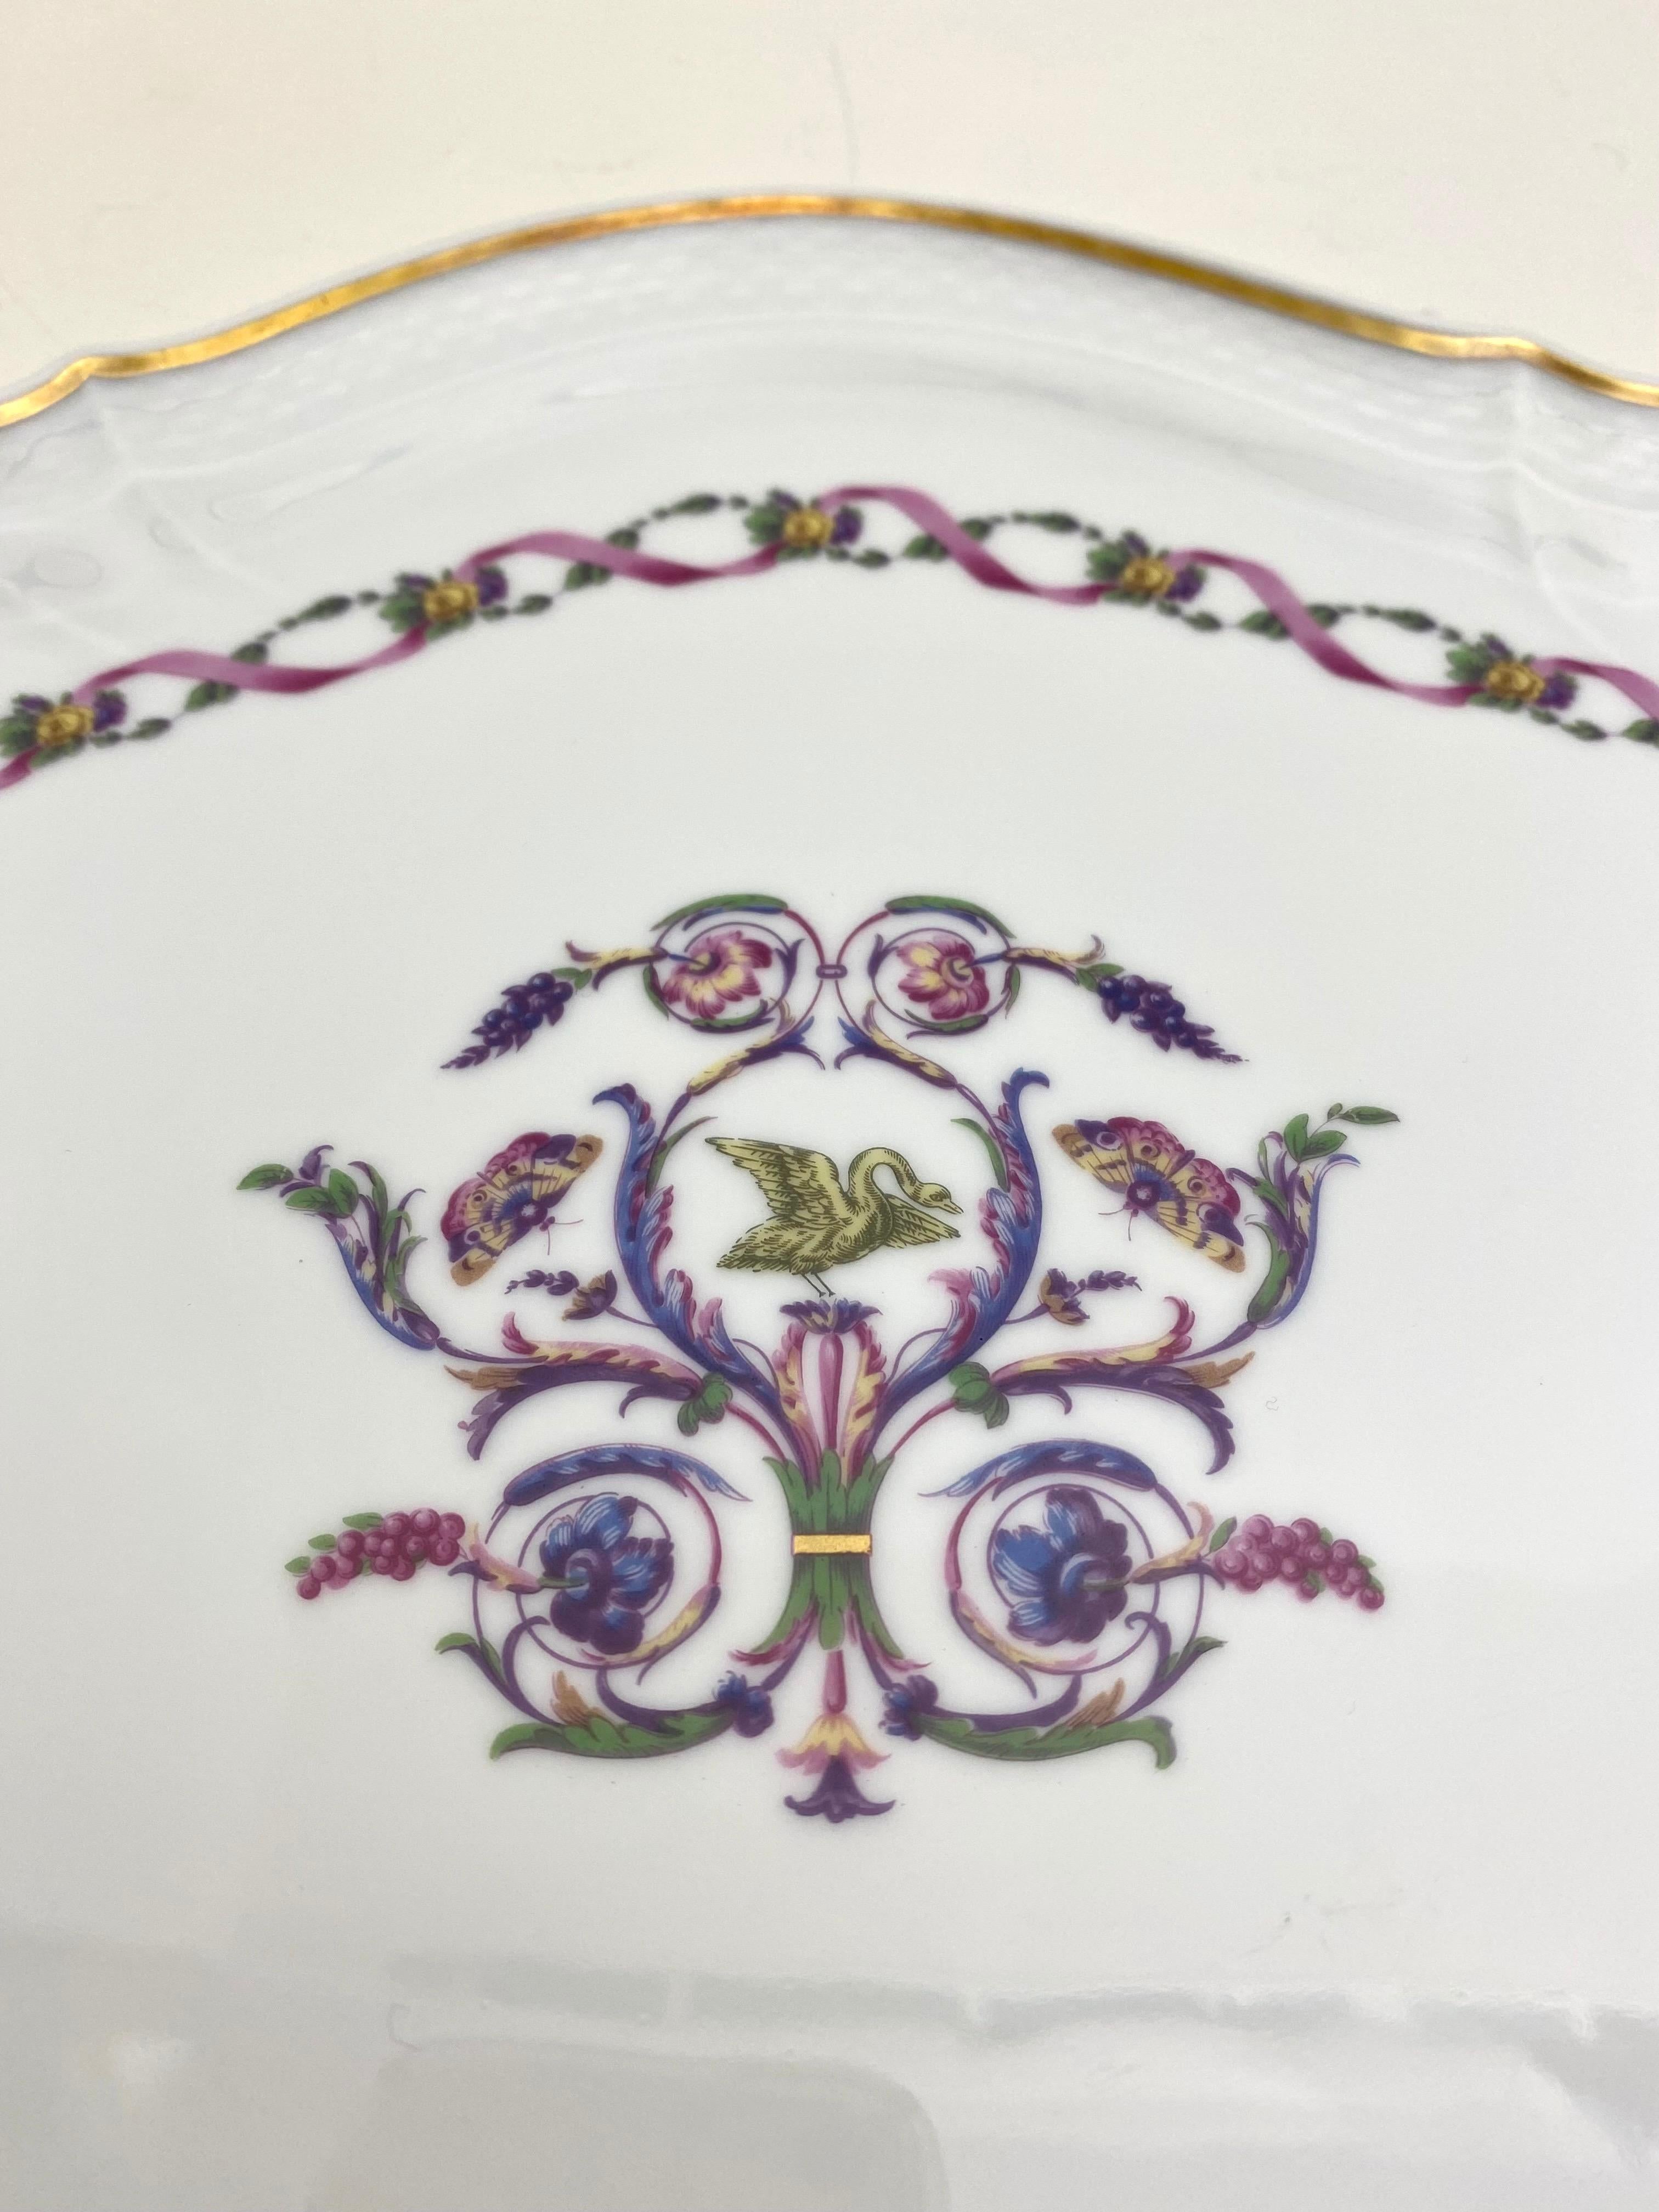 Richard Ginori Rapallo stunning serving platter. This extra large platter is painted with floral and gold designs, enhanced with gold trim on White Porcelain. Very similar to a Herend Platter and rare to find this design. Made In Italy. Signed on